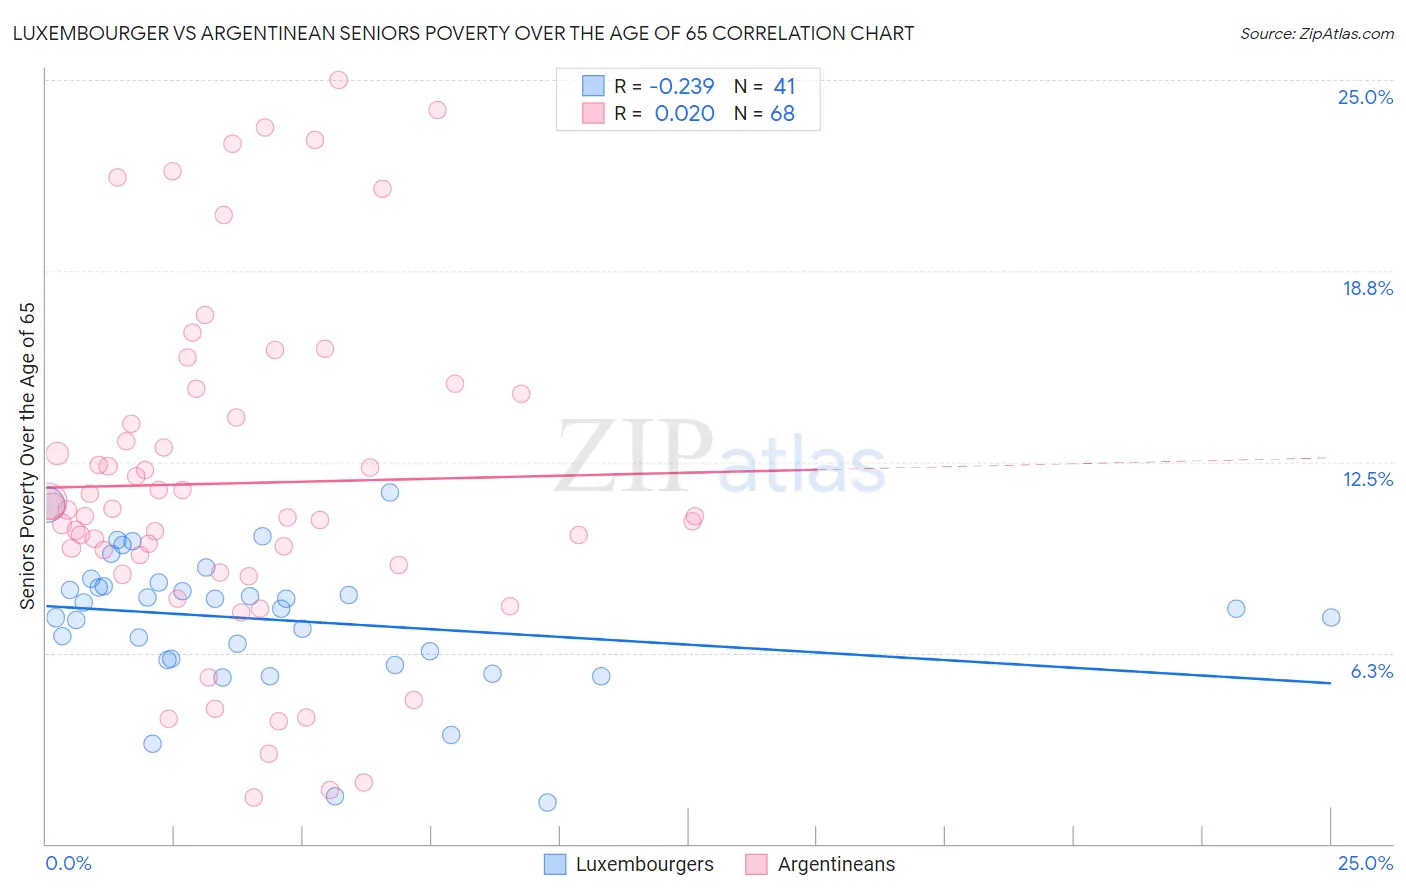 Luxembourger vs Argentinean Seniors Poverty Over the Age of 65